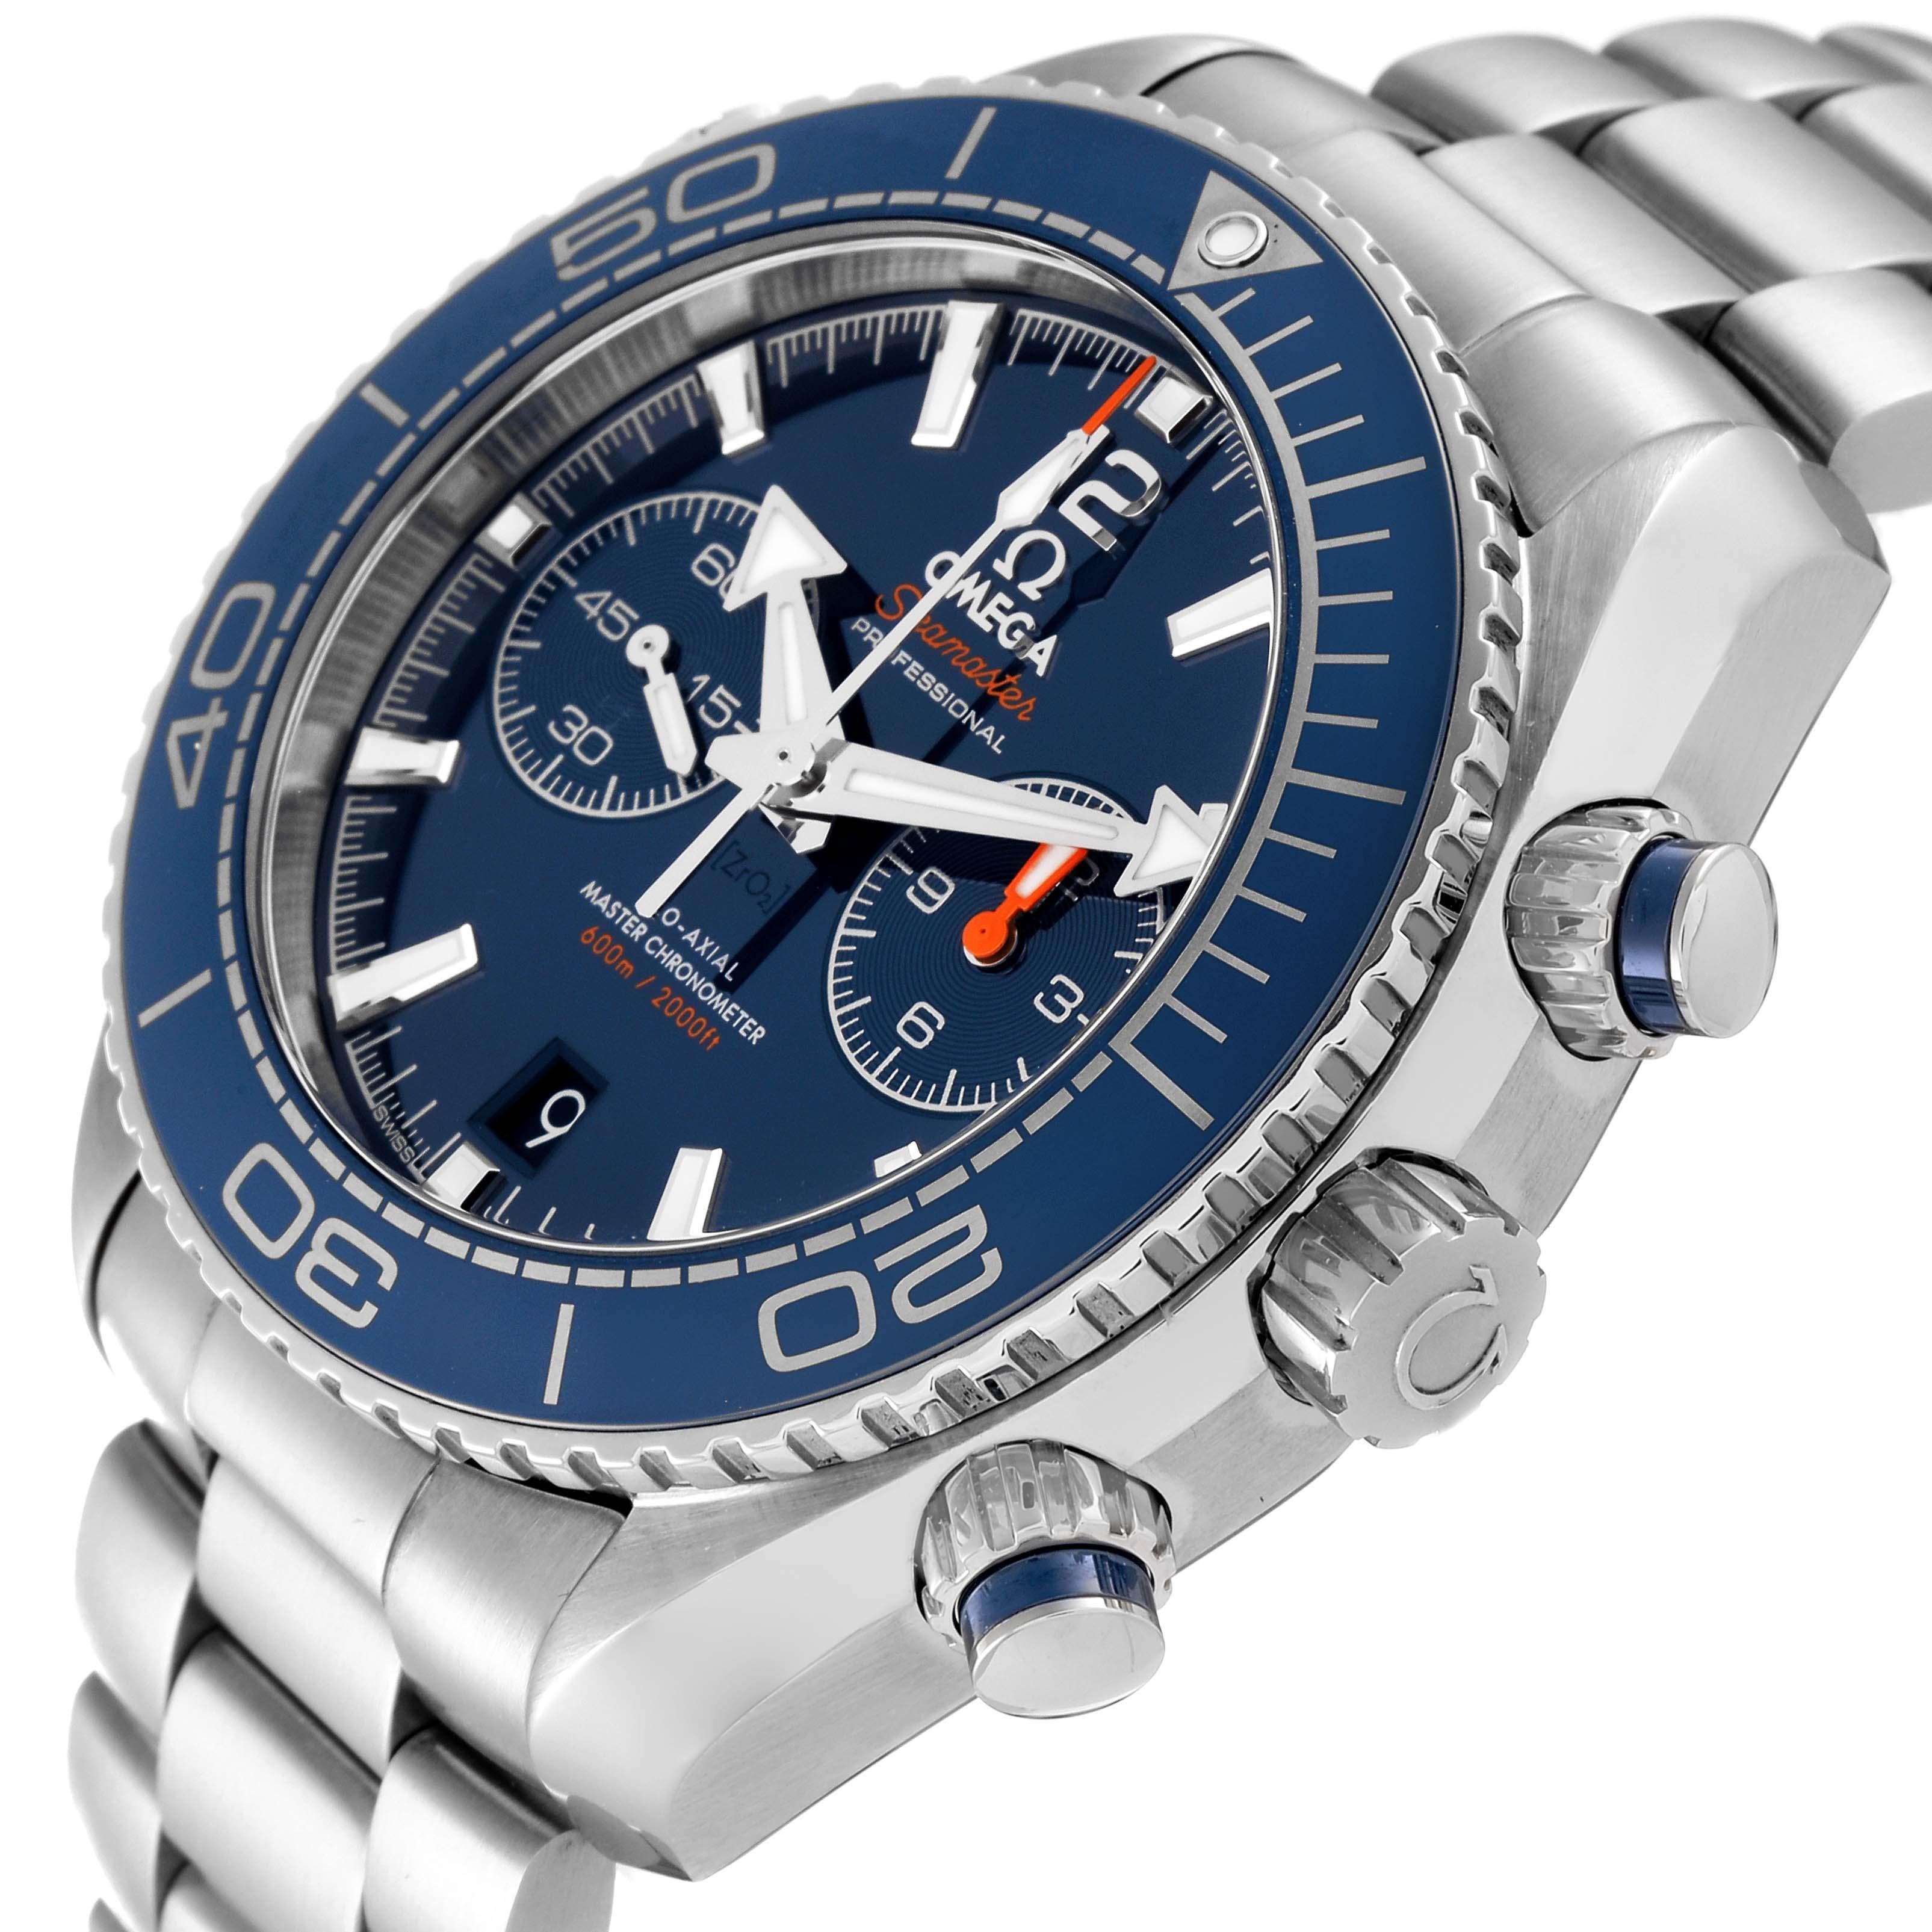 Omega Planet Ocean Chronograph Blue Dial Mens Watch 215.30.46.51.03.001 Box Card For Sale 1